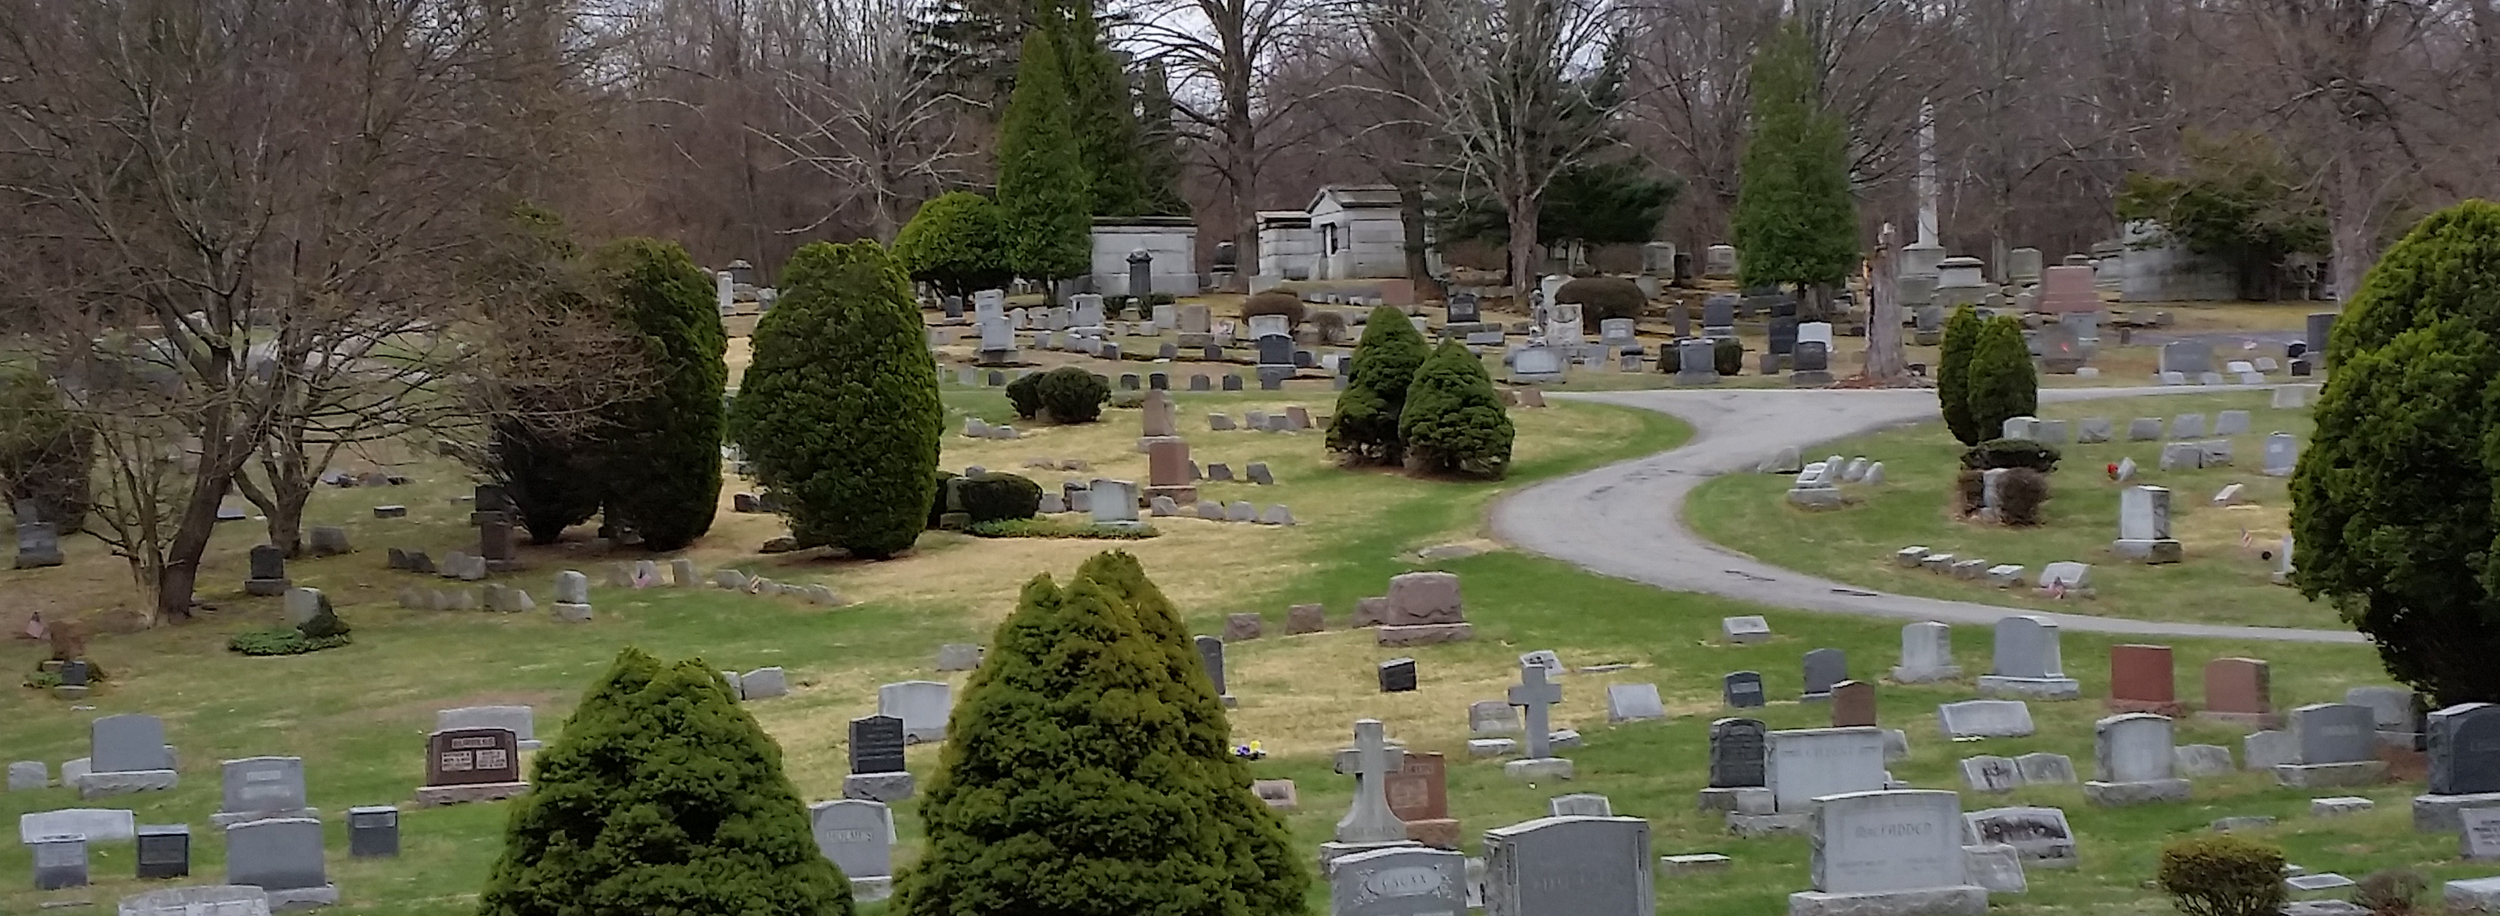 Peaceful cemetery in Northern Westchester County, NY